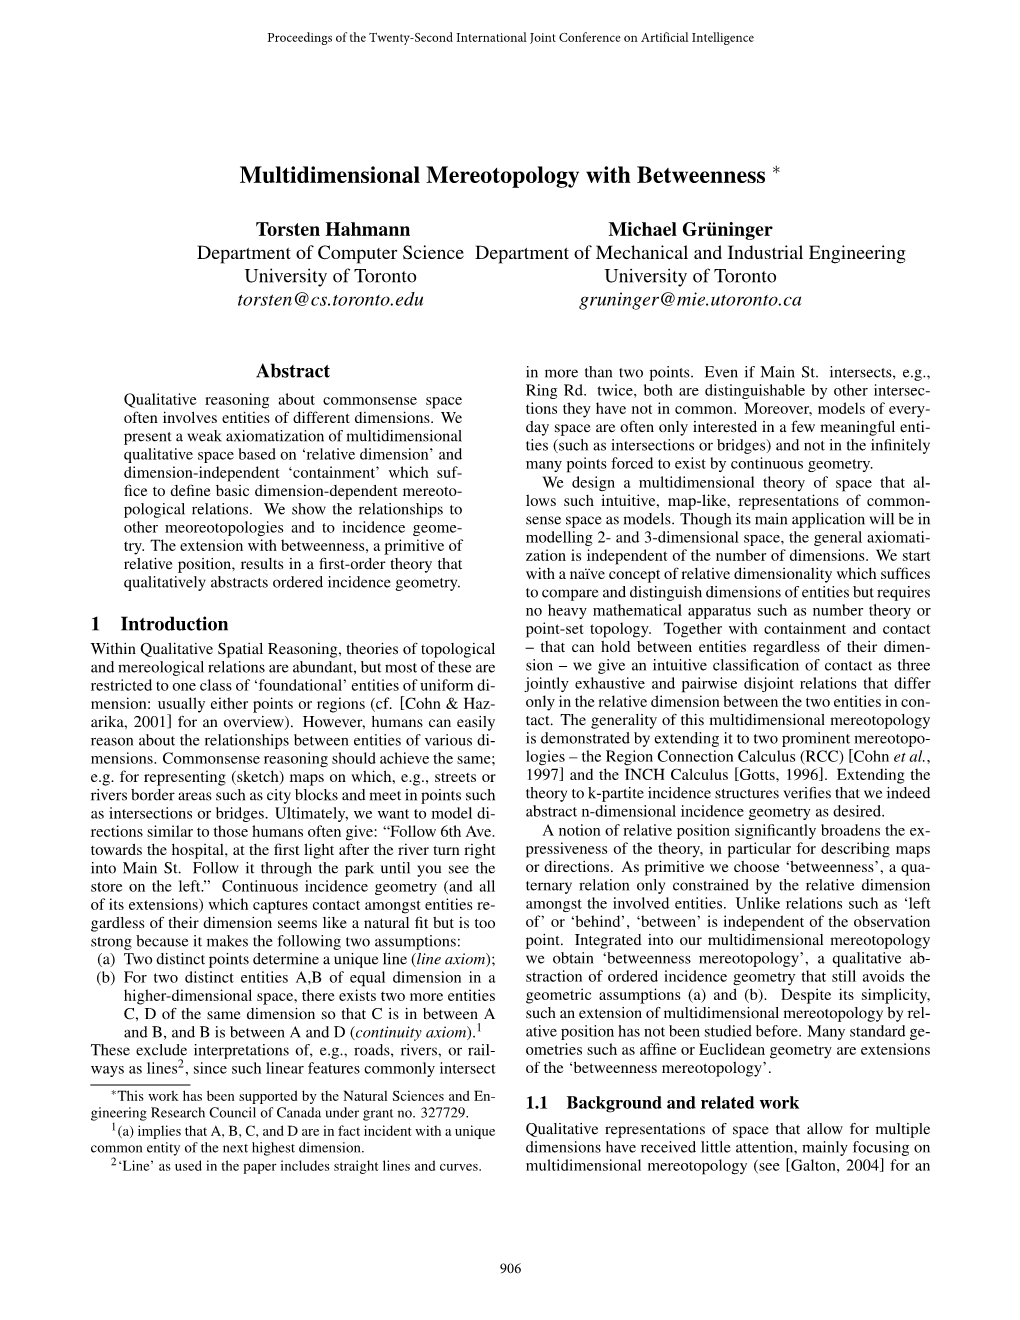 Multidimensional Mereotopology with Betweenness ∗